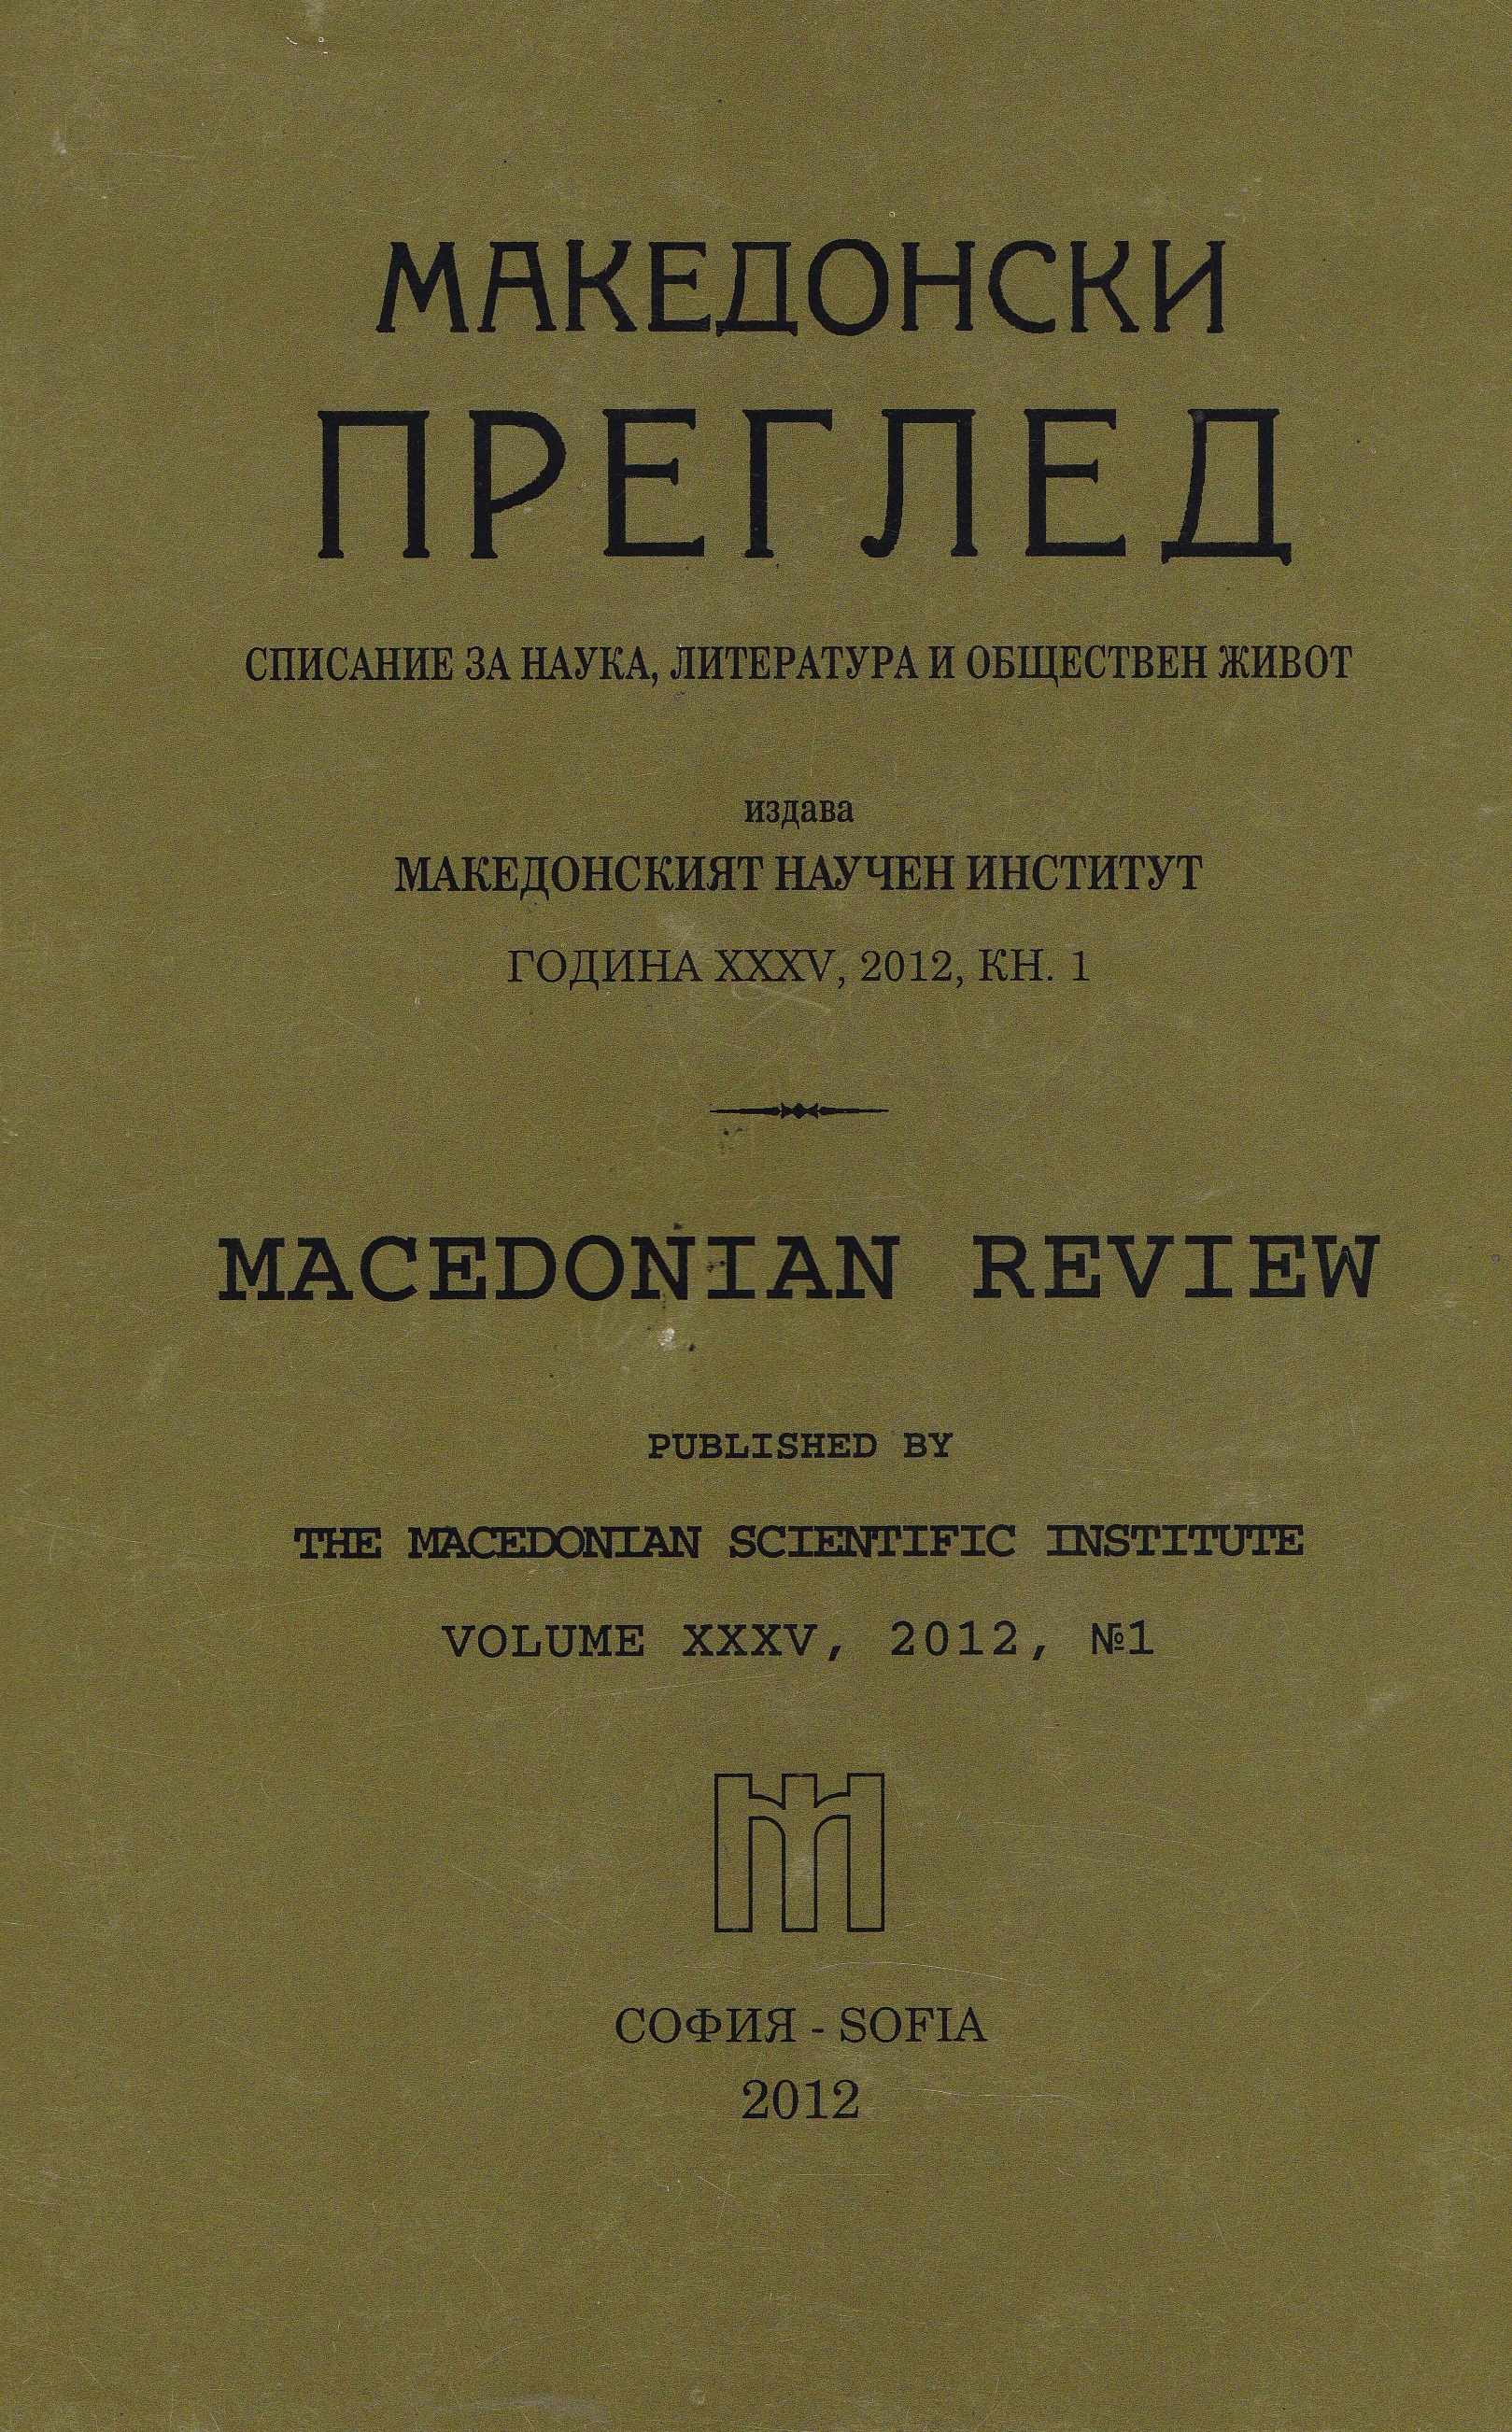 Documents and materials about Dr. Christo Tatarchev from the archive of Ivan Mihailov Cover Image